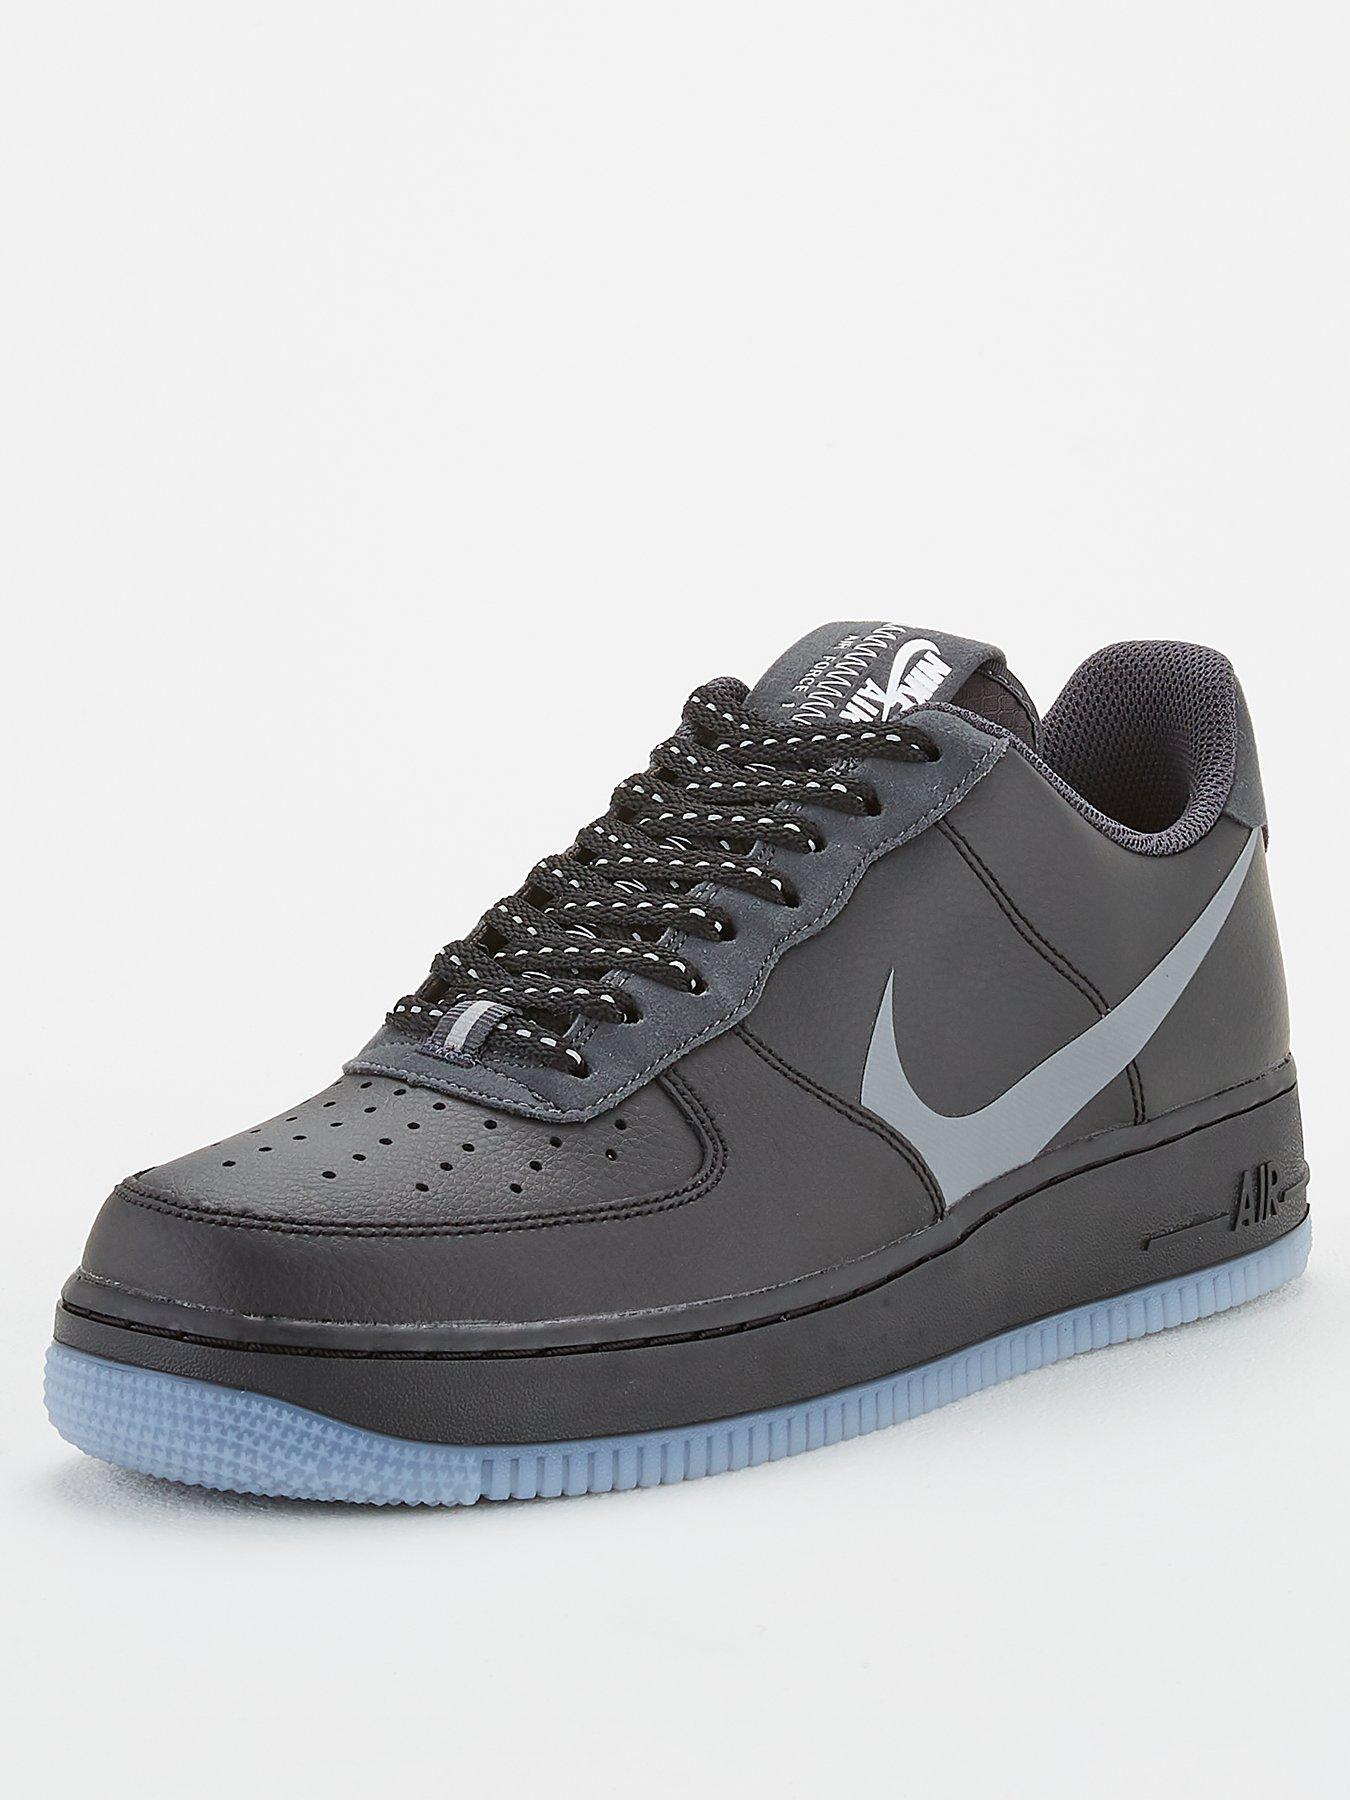 nike air force 1 black and silver